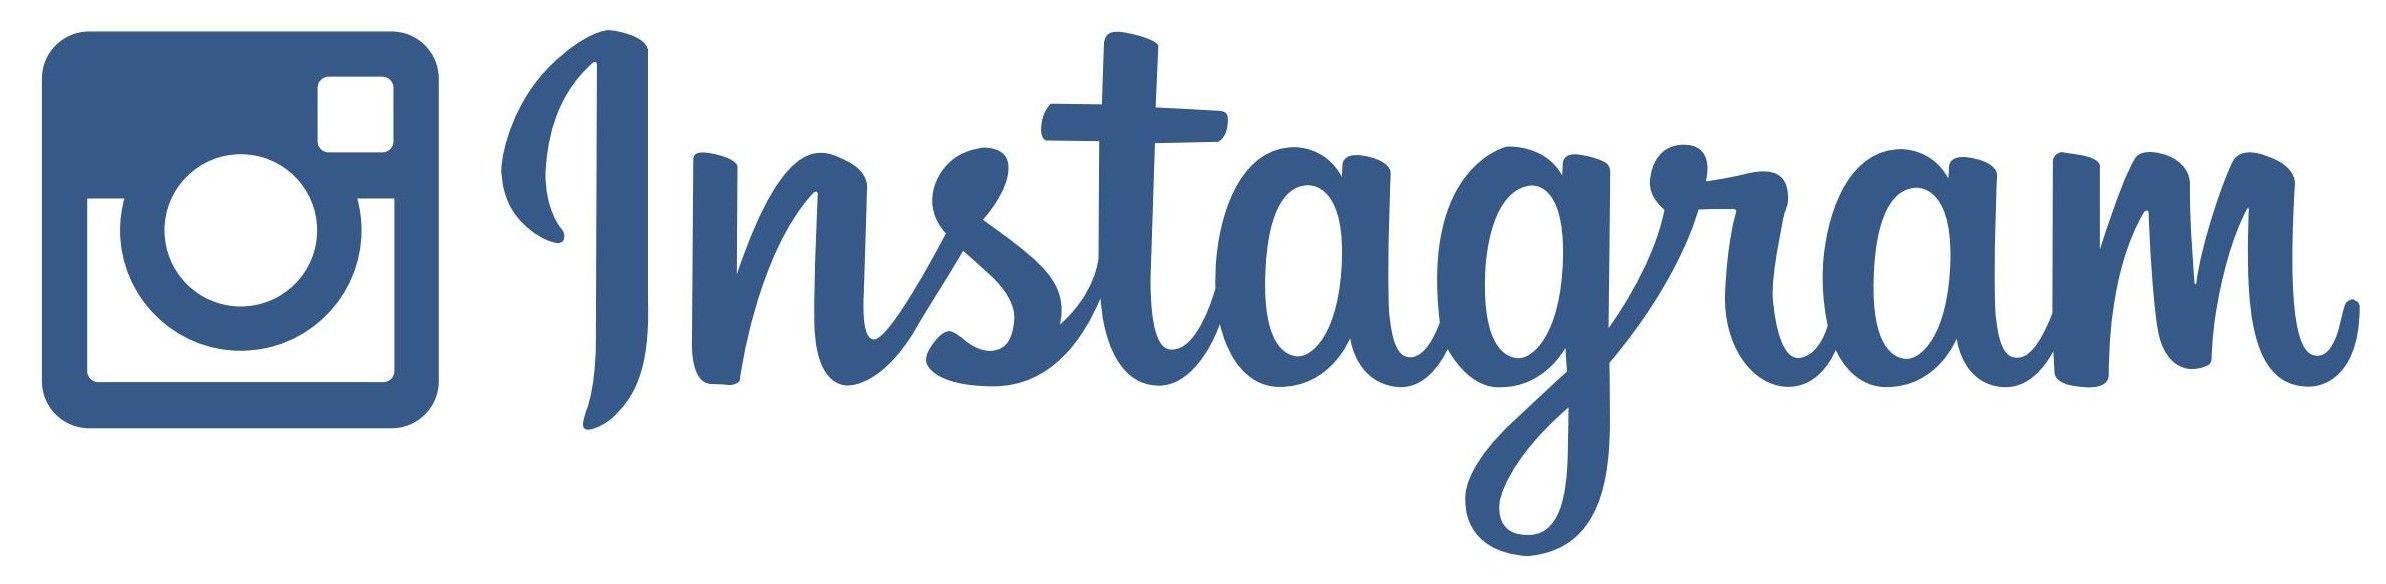 Large Instagram Logo - instagram logo vector - Free Large Images | Ideas for the House ...